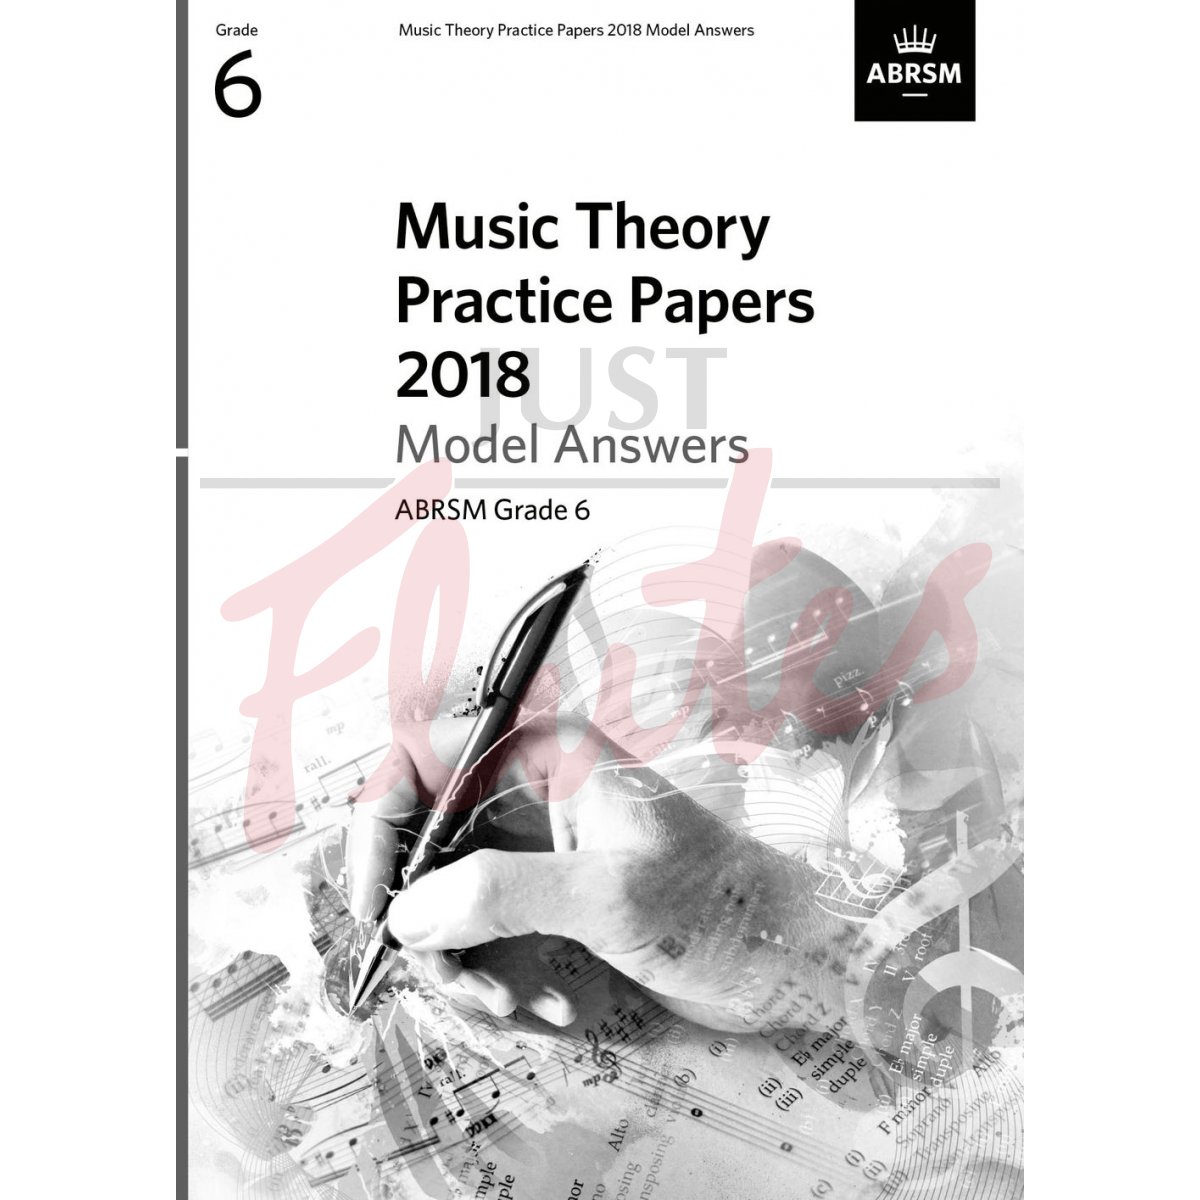 Music Theory Practice Papers 2018 Grade 6 - Model Answers